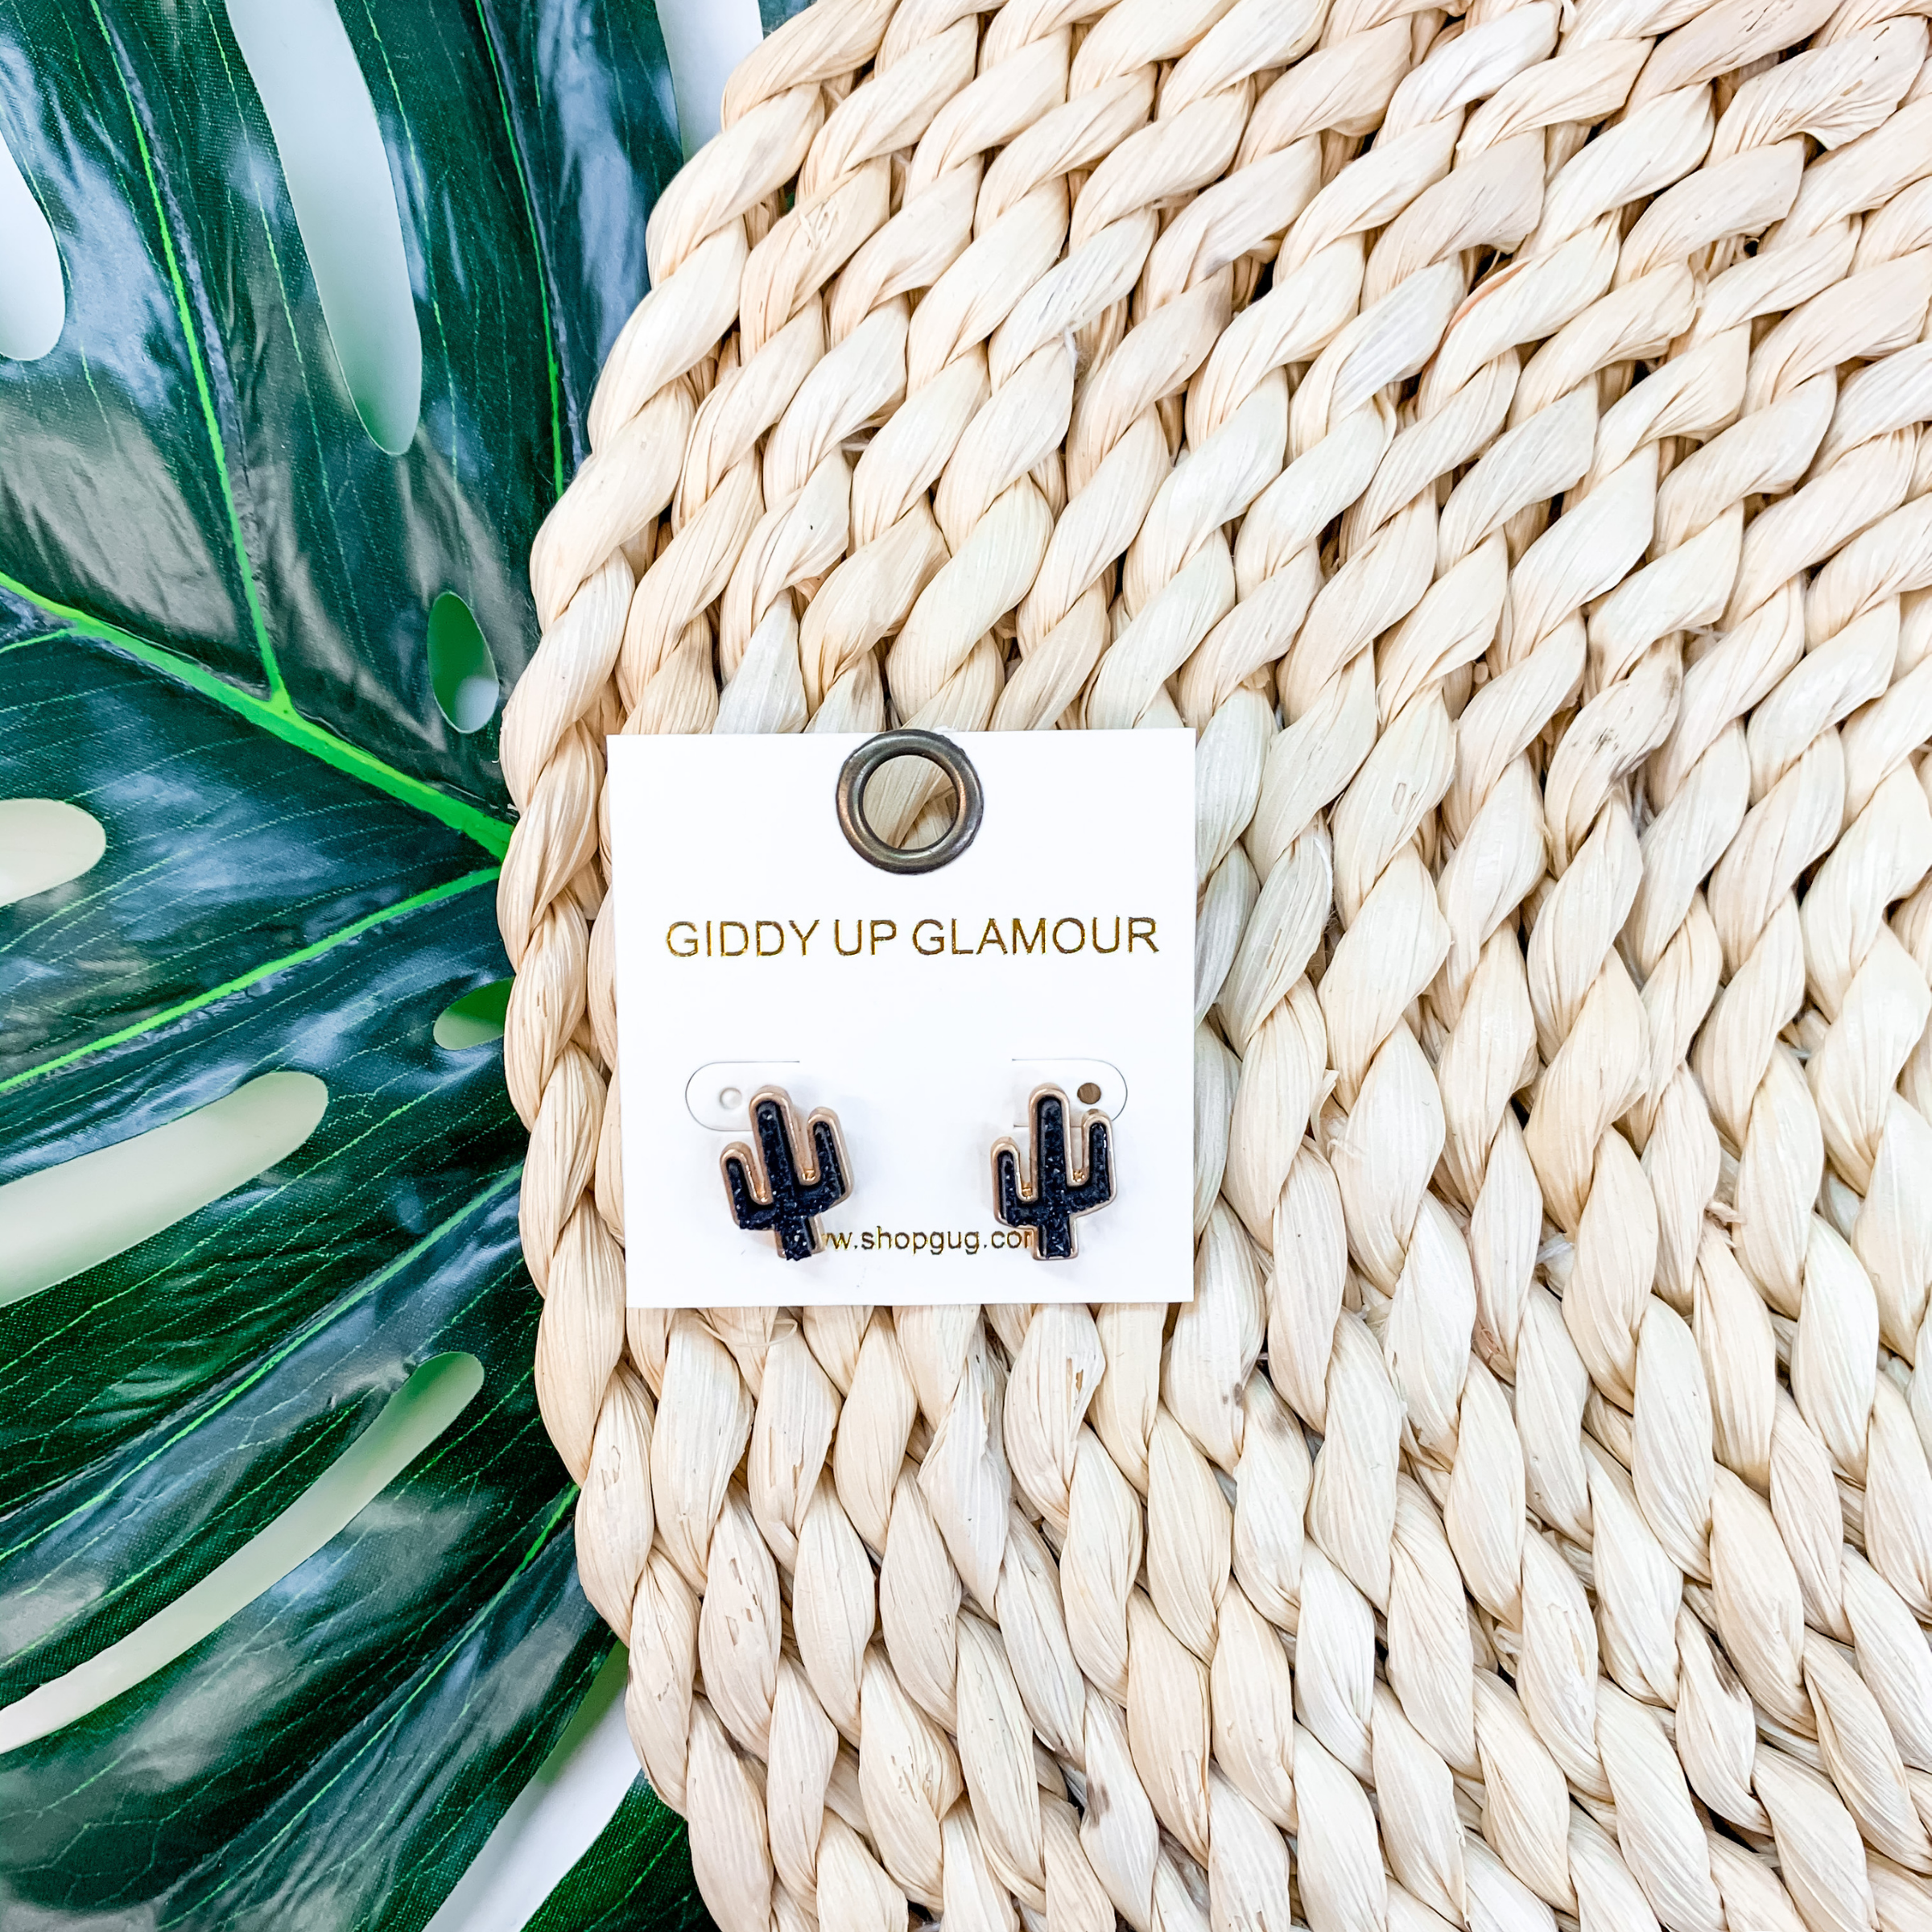 Cactus Makes Perfect Cactus Stud Earrings in Black - Giddy Up Glamour Boutique